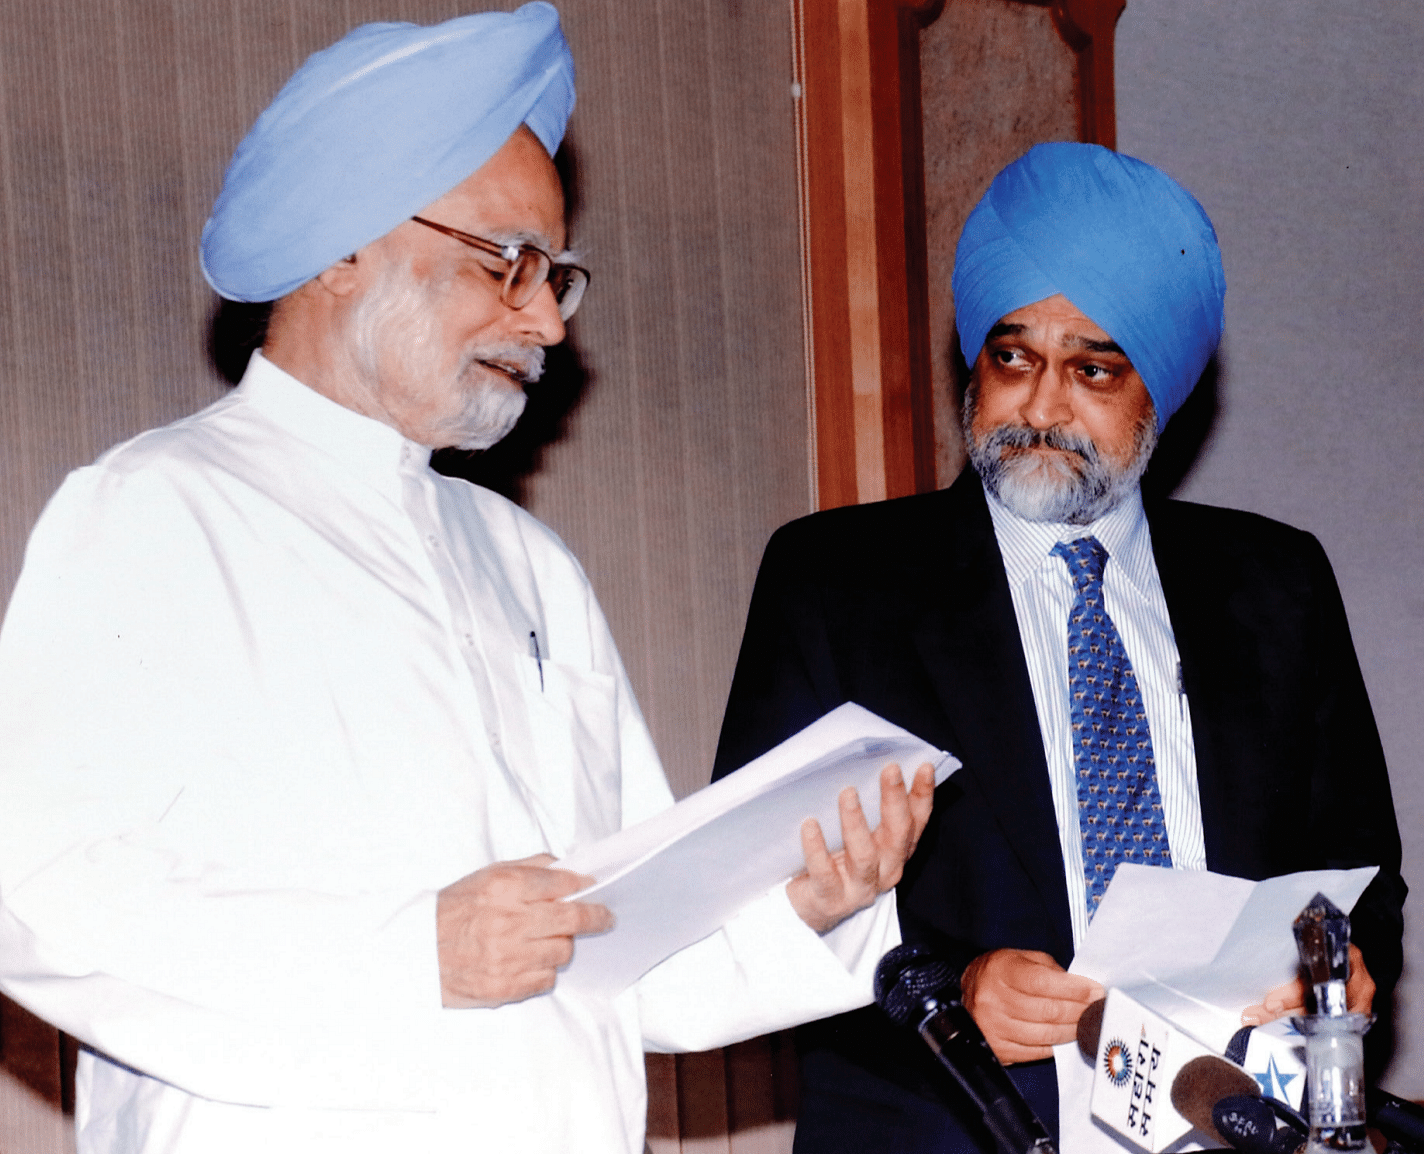 Prime Minister Manmohan Singh administering the oath of office to Montek Singh Ahluwalia as deputy chairman, Planning Commission, in 2004. | Photo by special arrangement